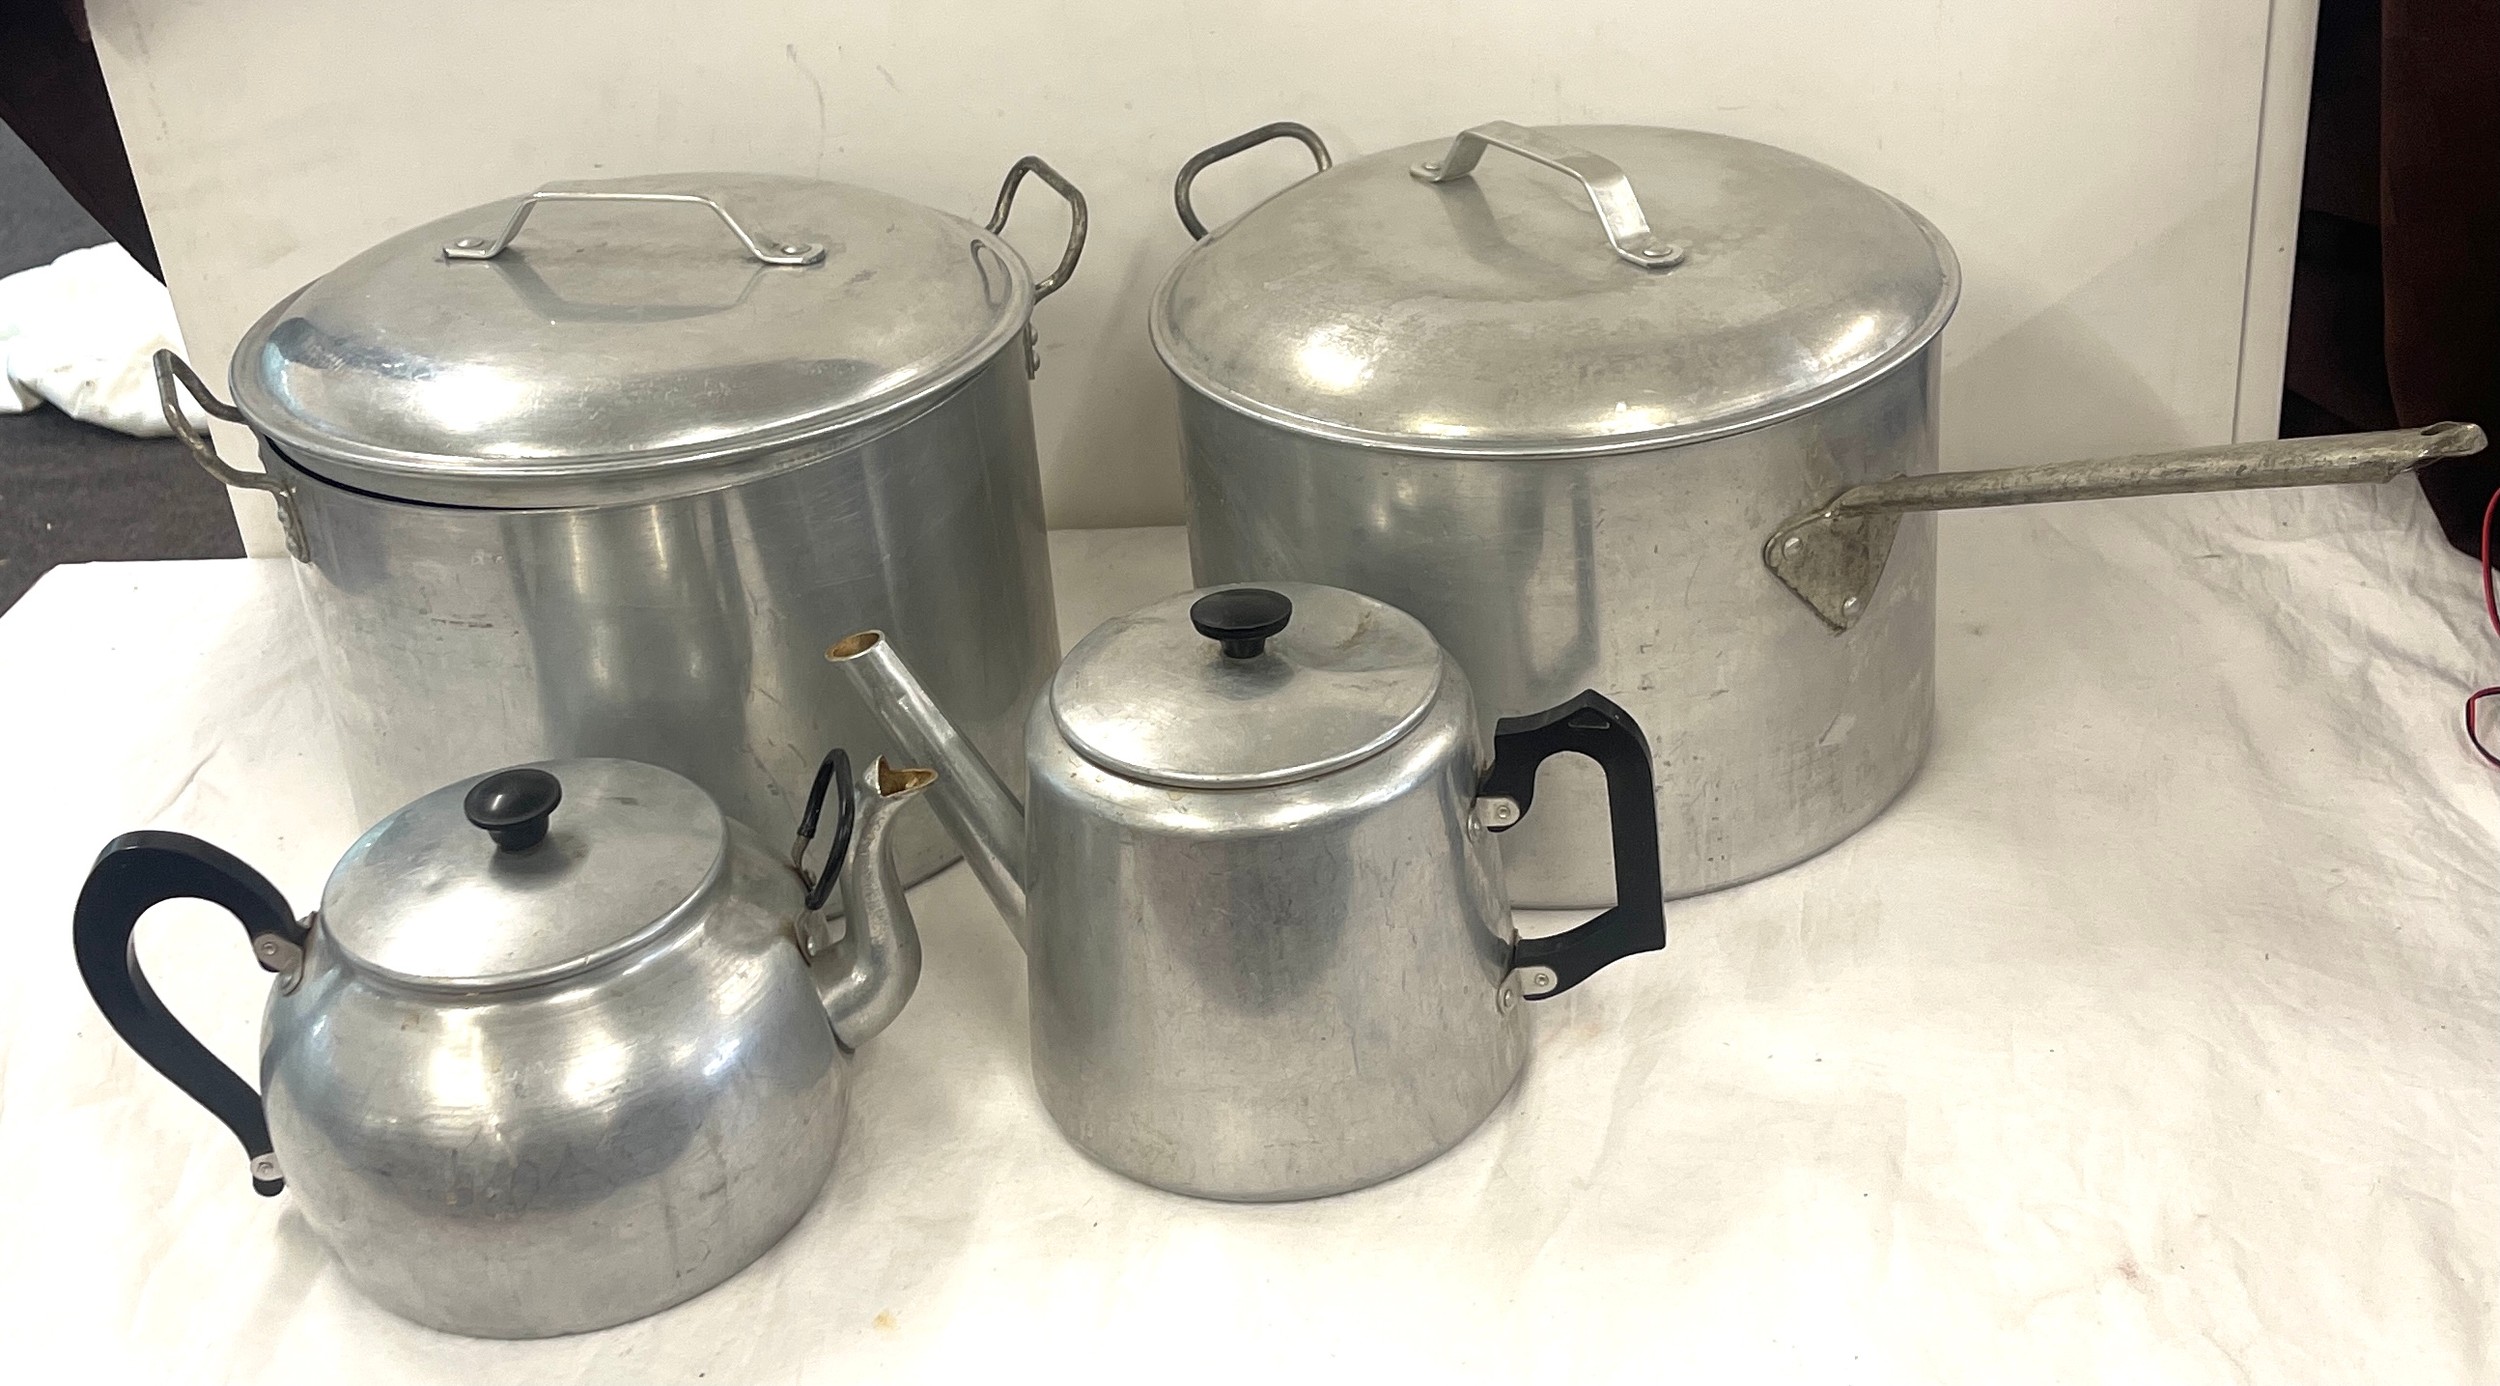 Large stainless steel pans and tea pot, approximate diameter of pans: 12 inches